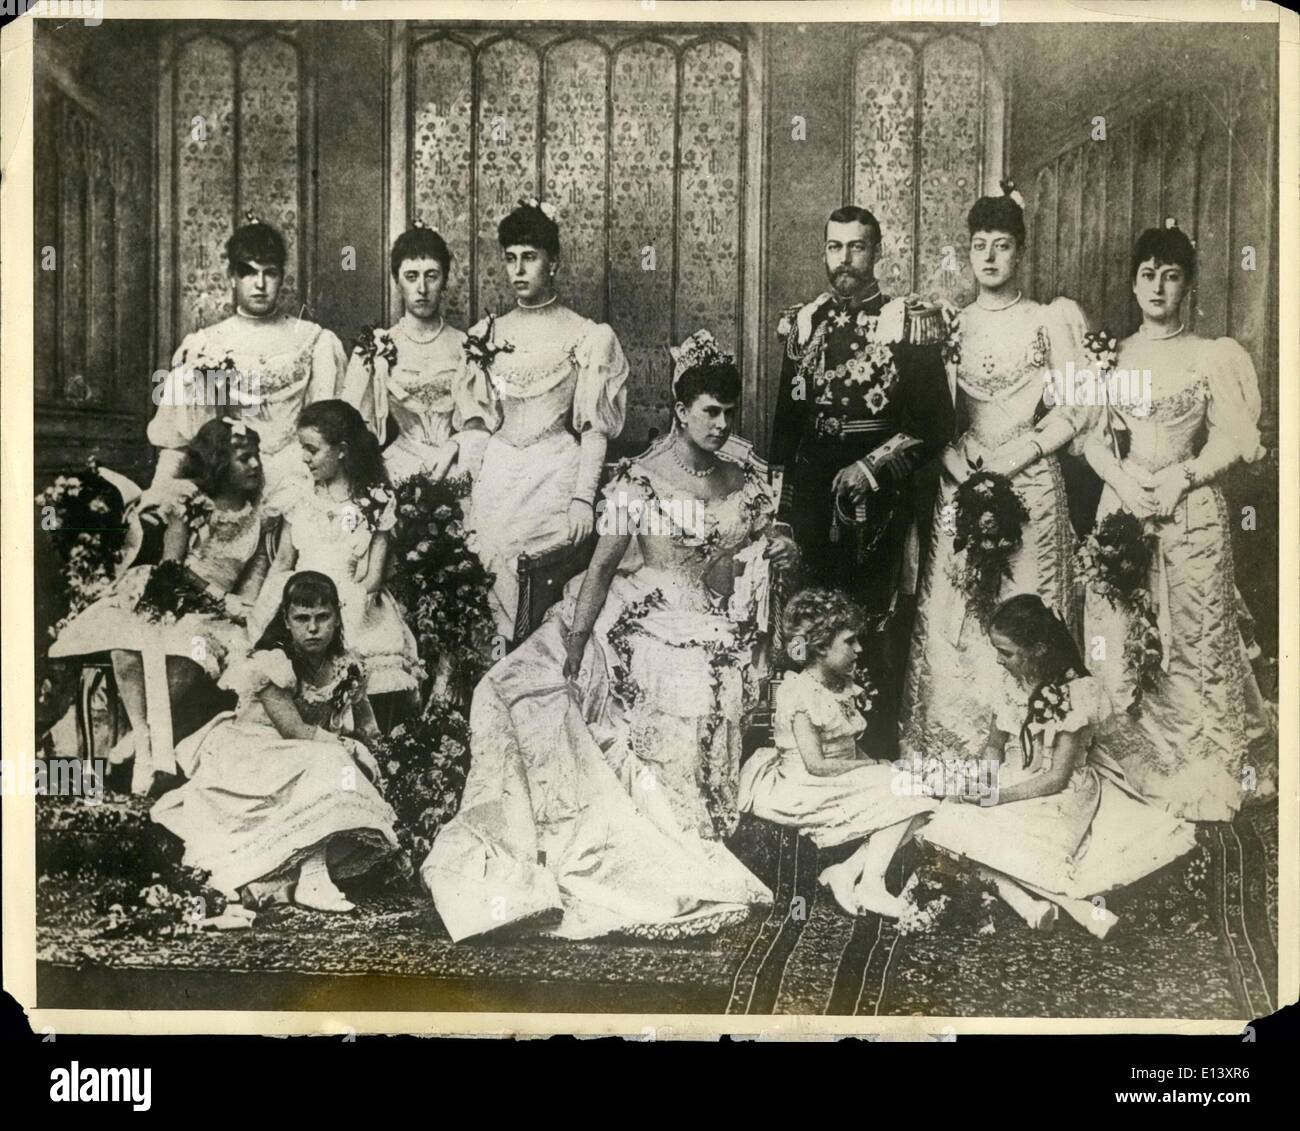 Mar. 27, 2012 - King George And Queen Mary And Bridal Party---- An interesting photograph of King George and his bride with bridesmaids, on the occasion of their wedding July, 6 1893. Stock Photo